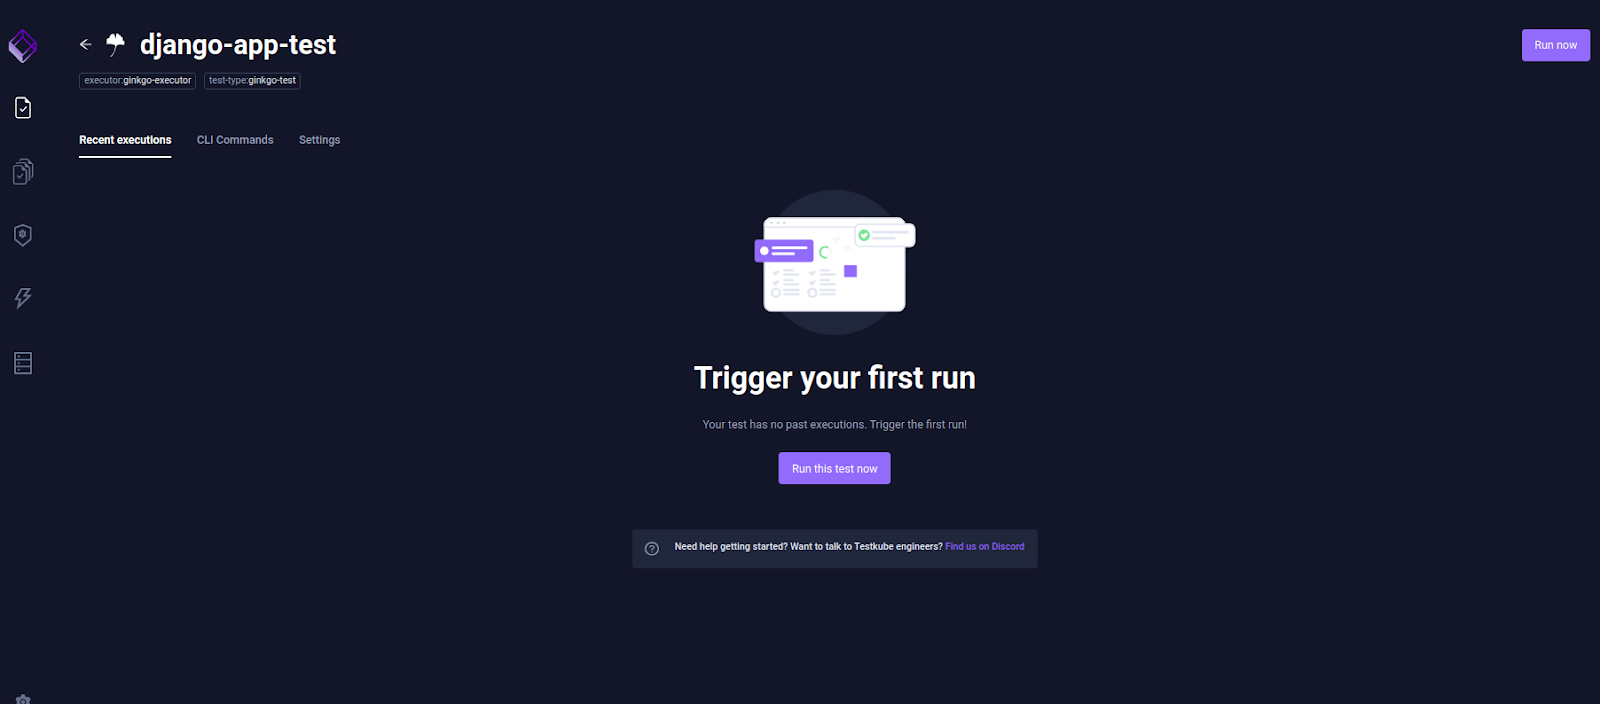 Run the tests by clicking on Run now option